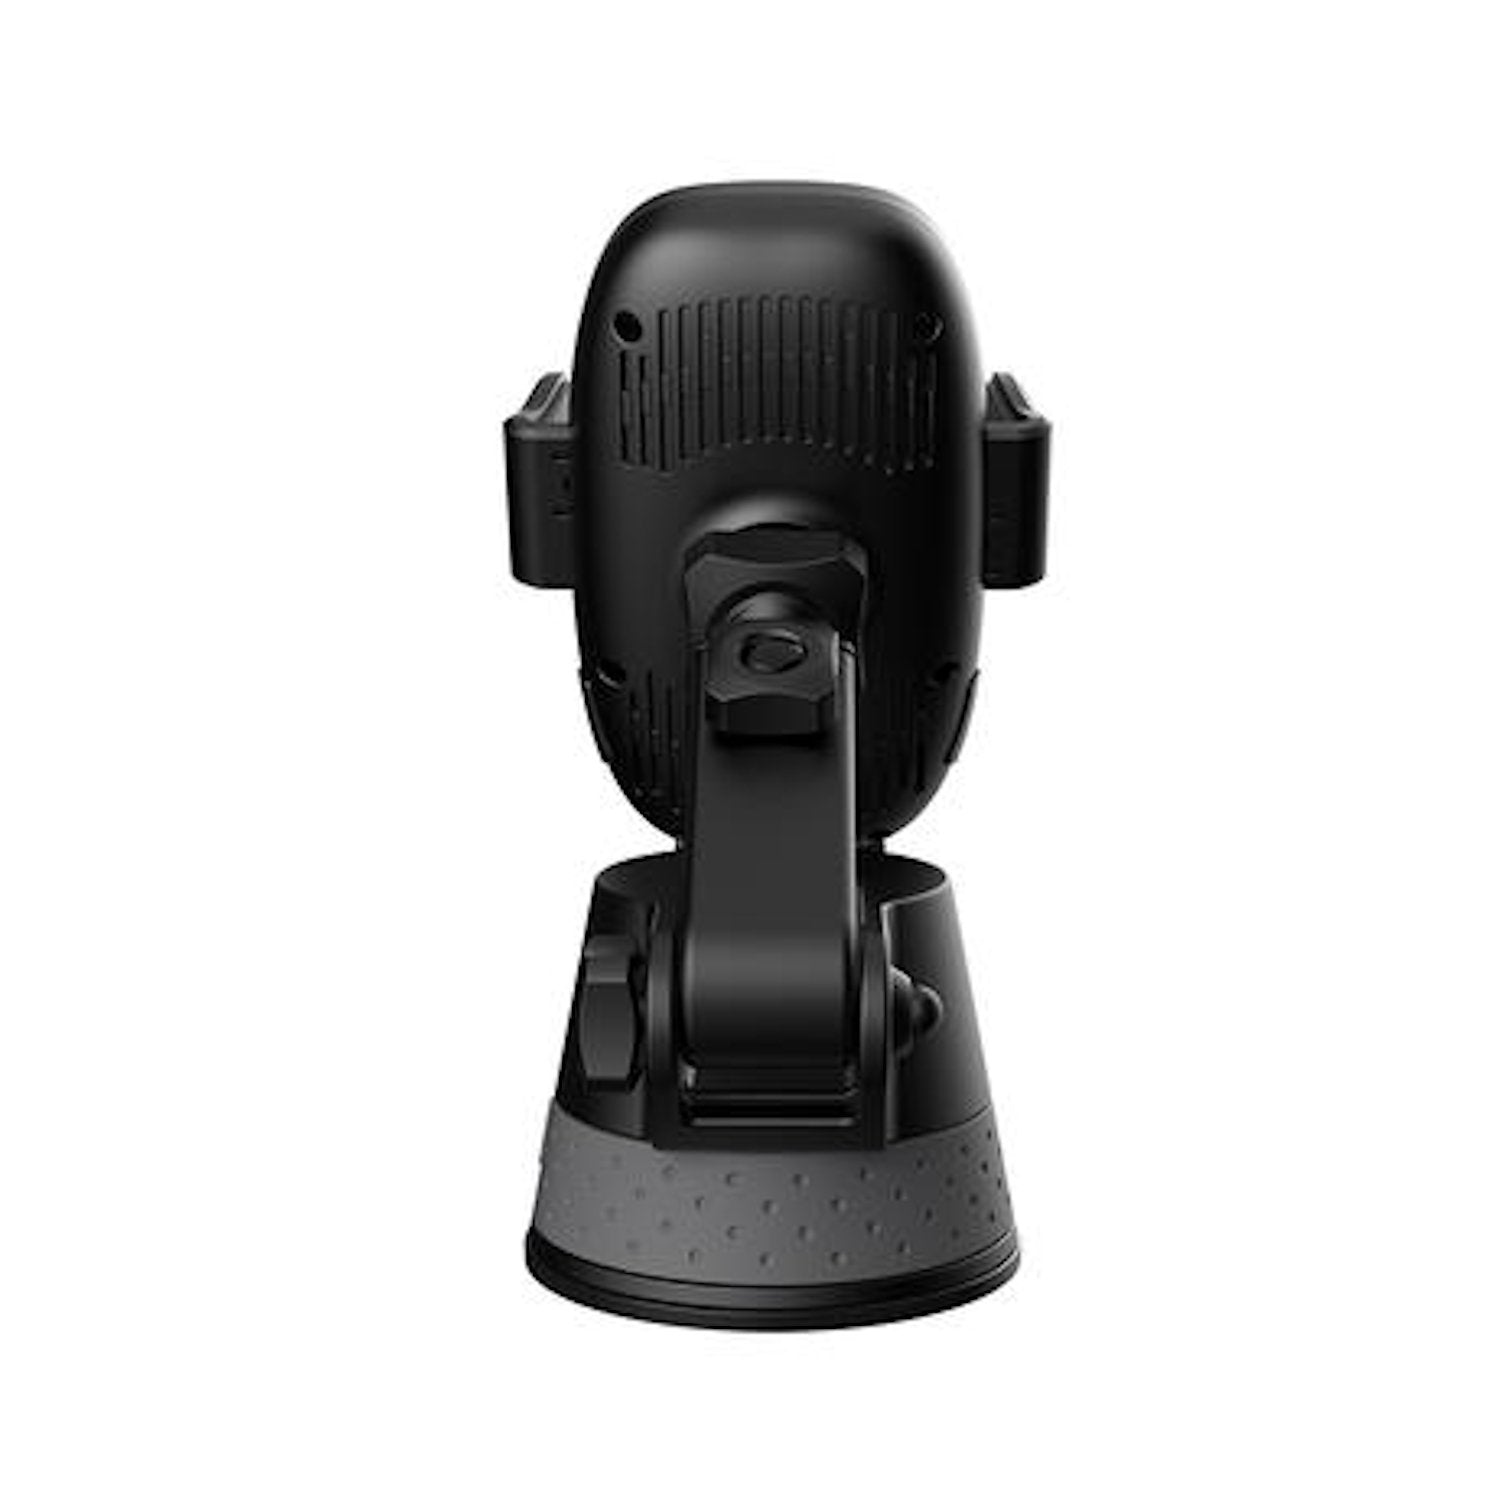 RAVPower Vehicular 10W Wireless Charger Auto Lock & Release Car Mount/Car Holder with Suction Base, Black(RP-SH014) Charger RAVPower 